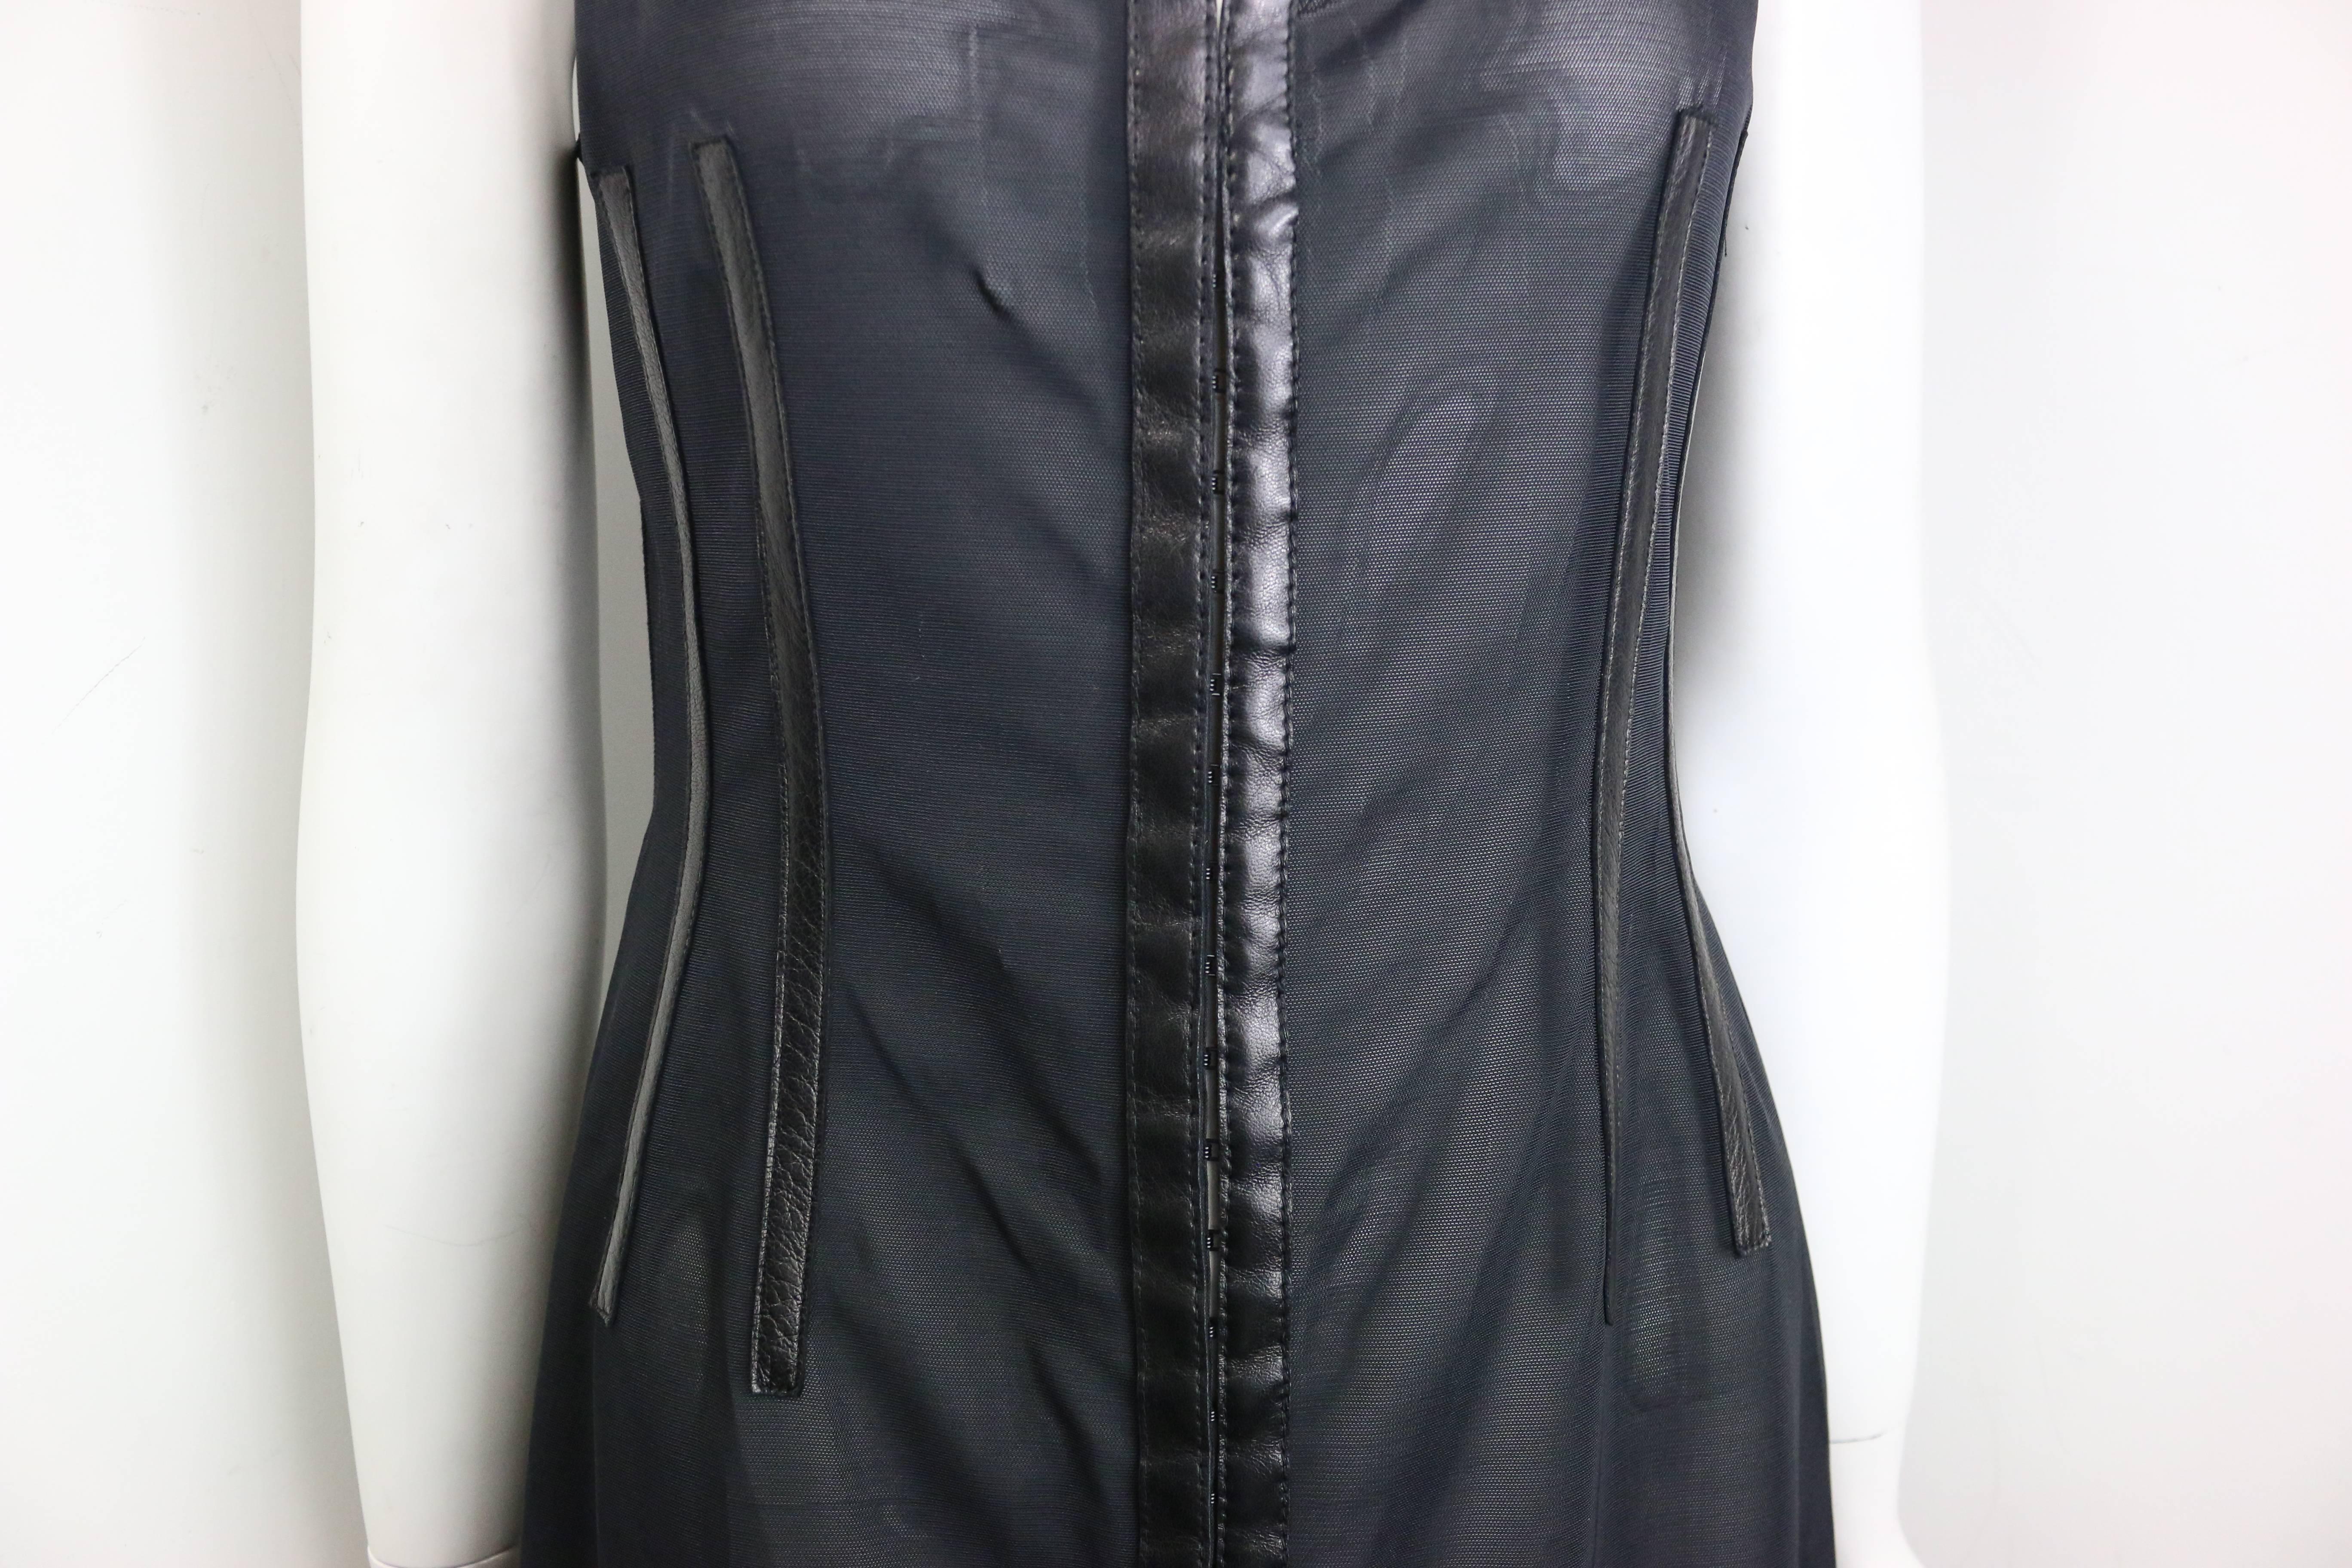 - Vintage 90s Plein Sud black leather trim see through sleeveless dress. Featuring thirty hooks for fastening closure. 

- Made in France. 

- Size 42. 

- 77% Nylon, 23% Spandex. 

- Original tag still attached to the dress. 